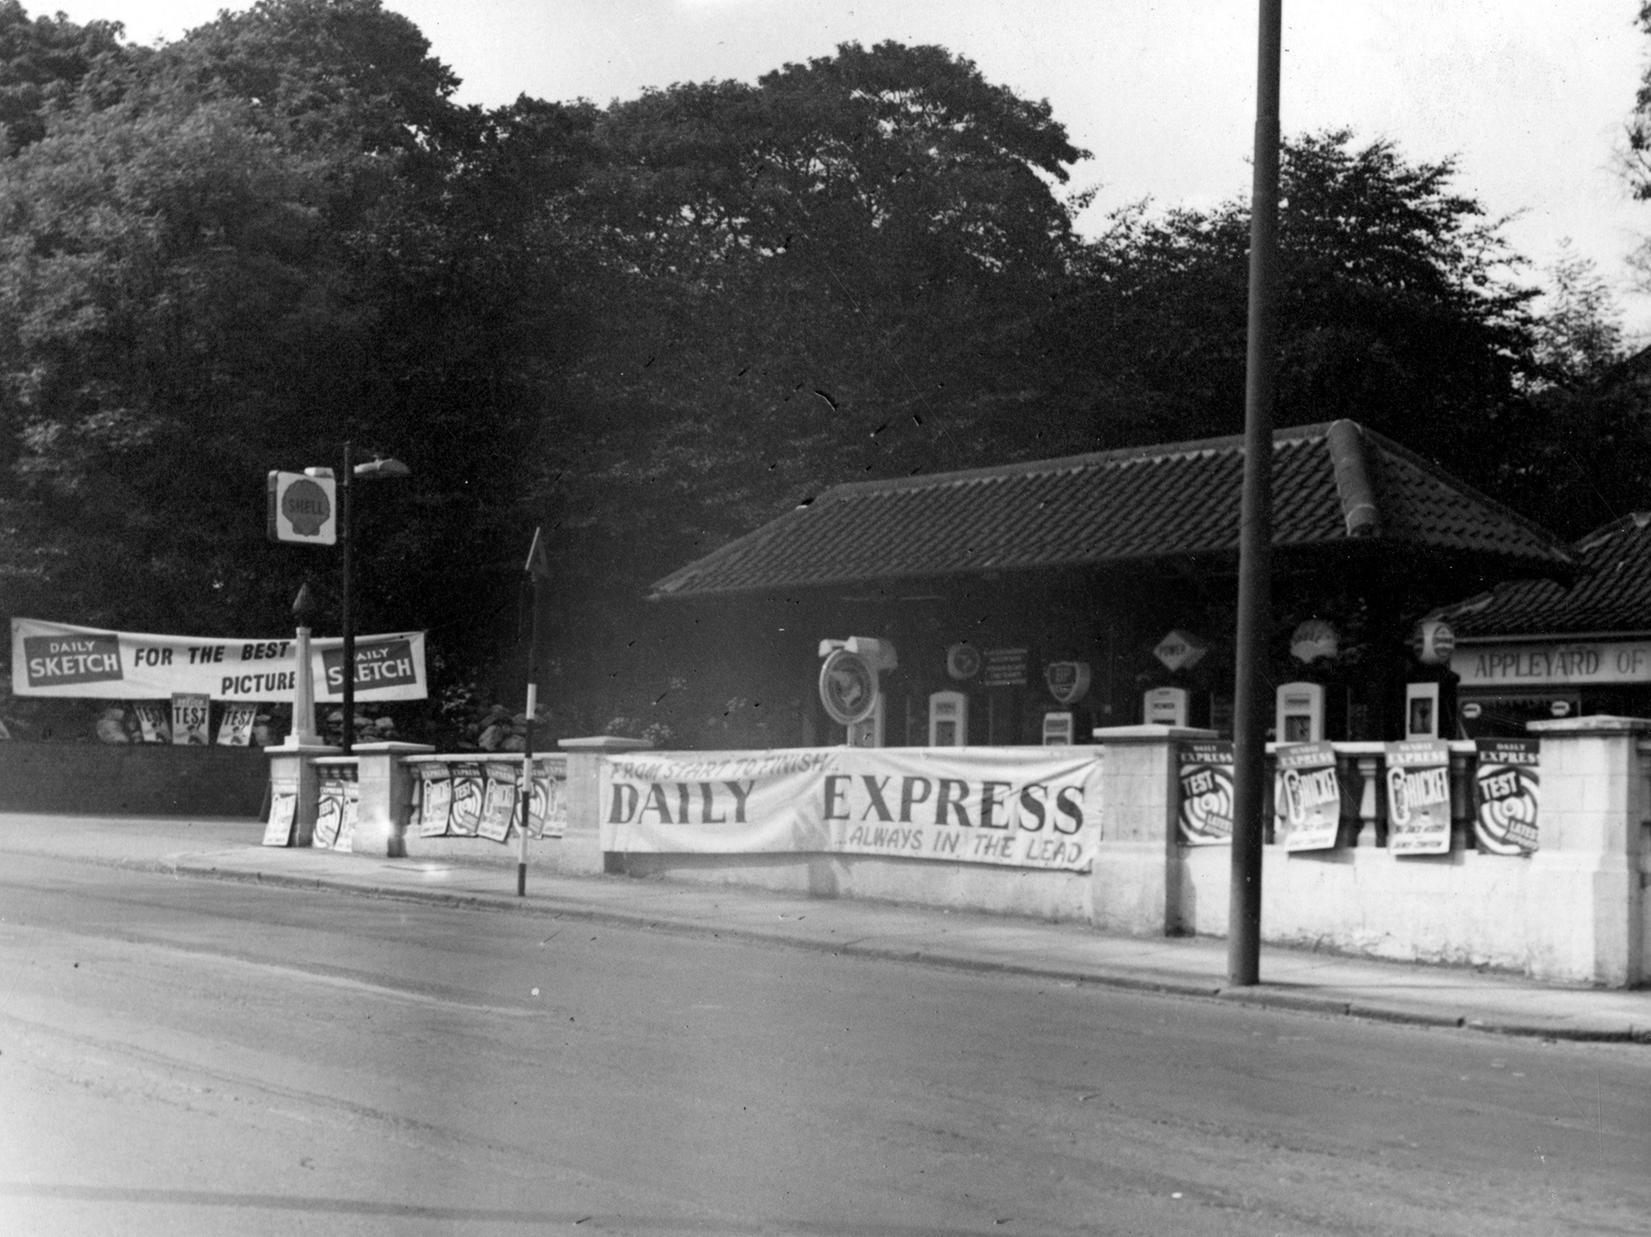 Petrol station Appleyard of Leeds at Headingley Lane. Banners advertising The Daily Express and The Daily Sketch are displayed on the wall in front of and to the side of the garage.